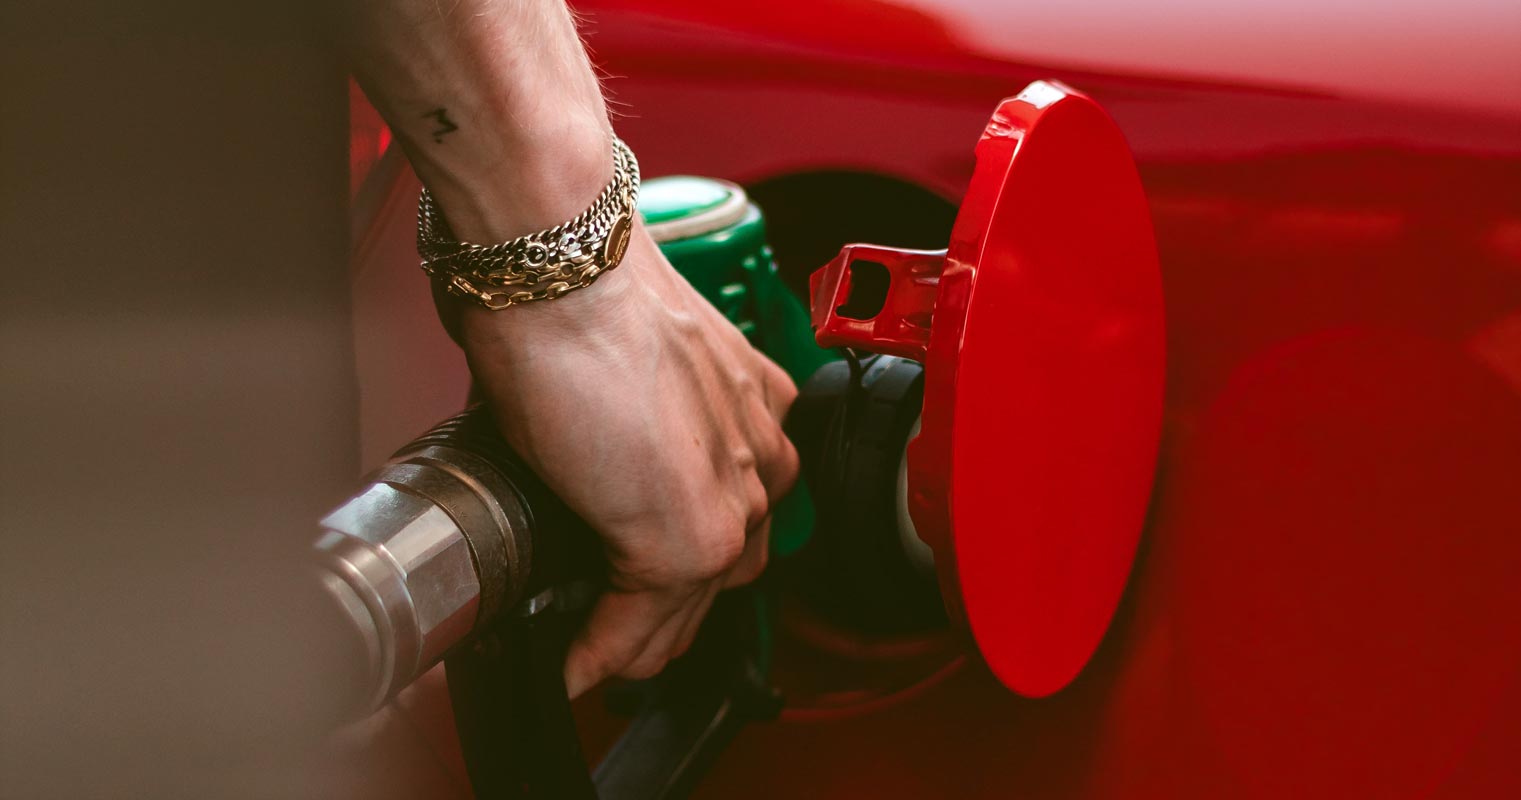 Filling Fuel in the Car